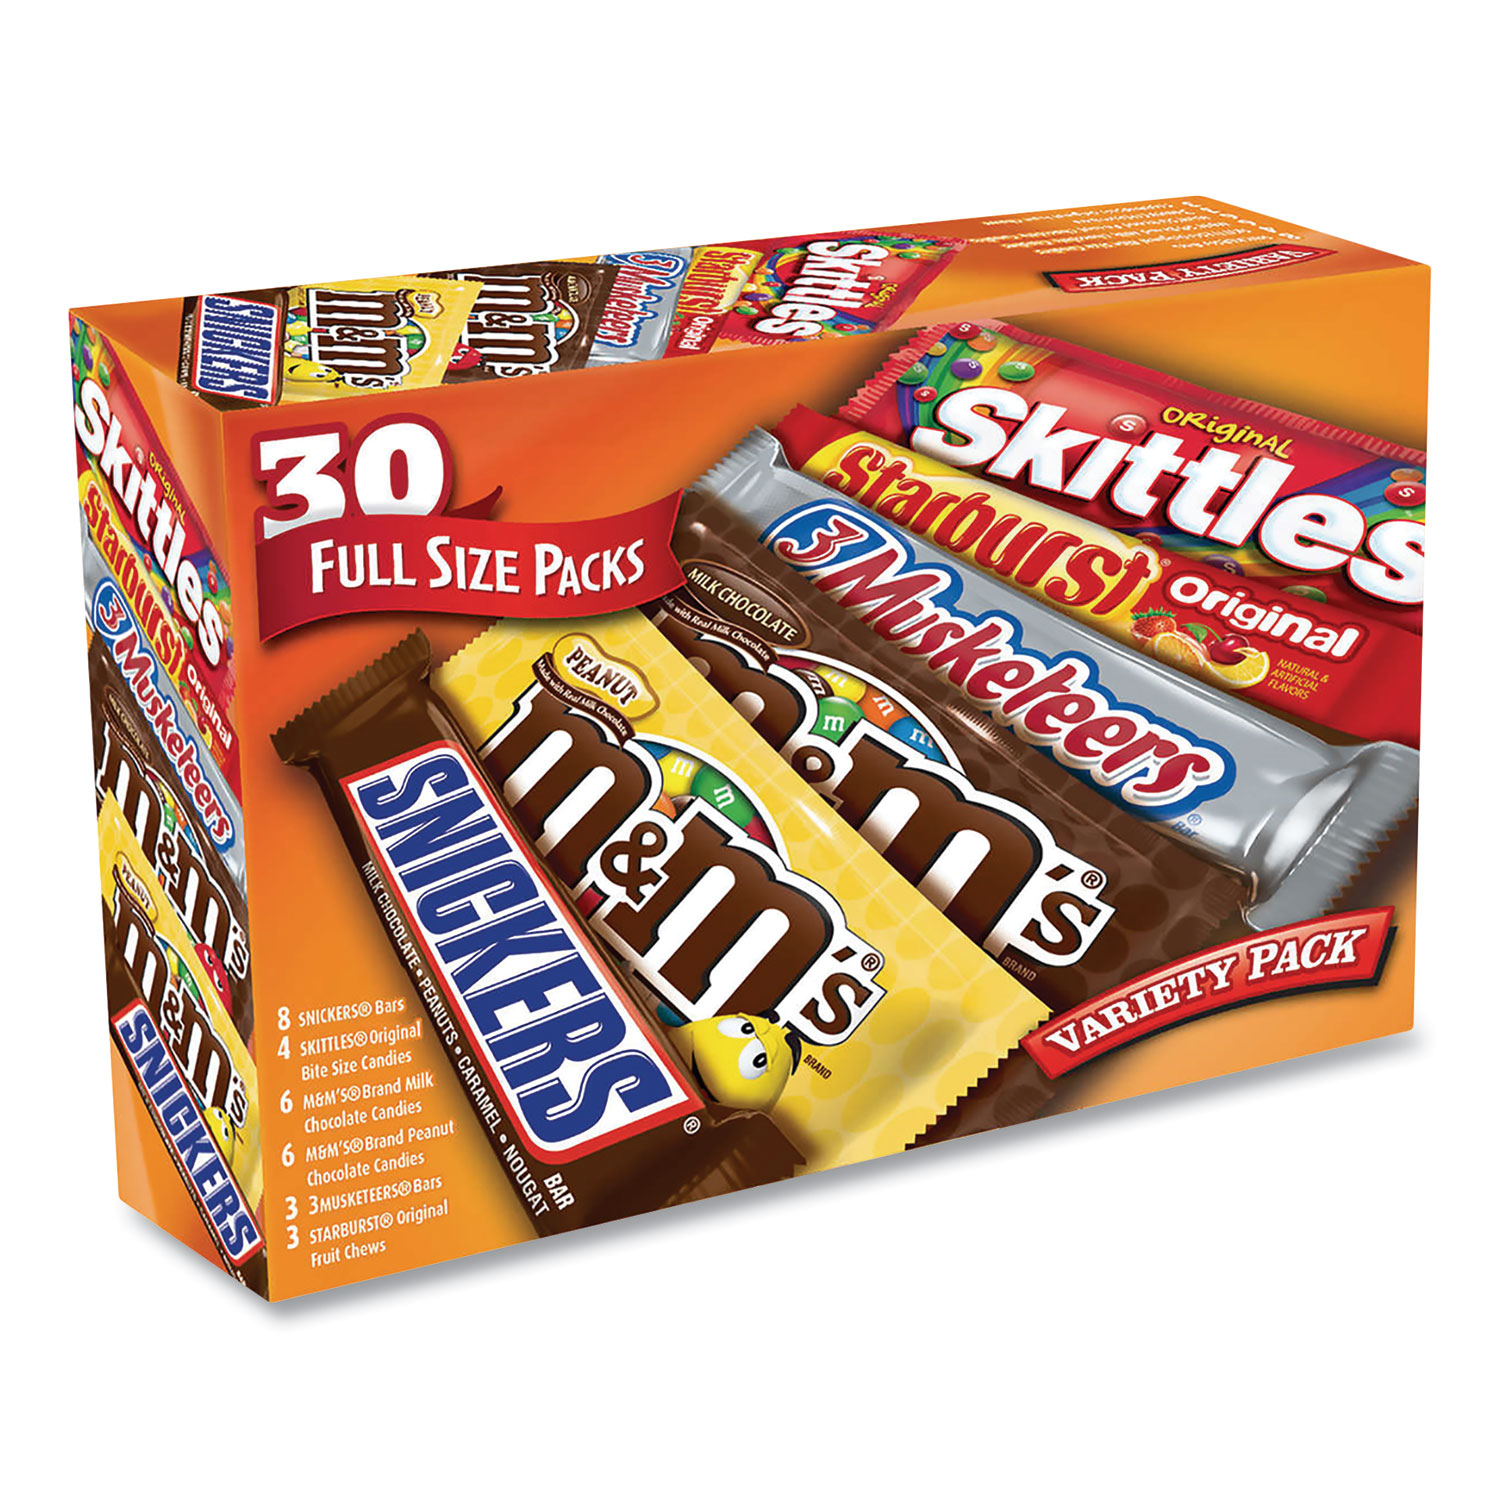 MARS Full-Size Candy Bars Variety Pack, Assorted, 30/Box, Free Delivery in 1-4 Business Days